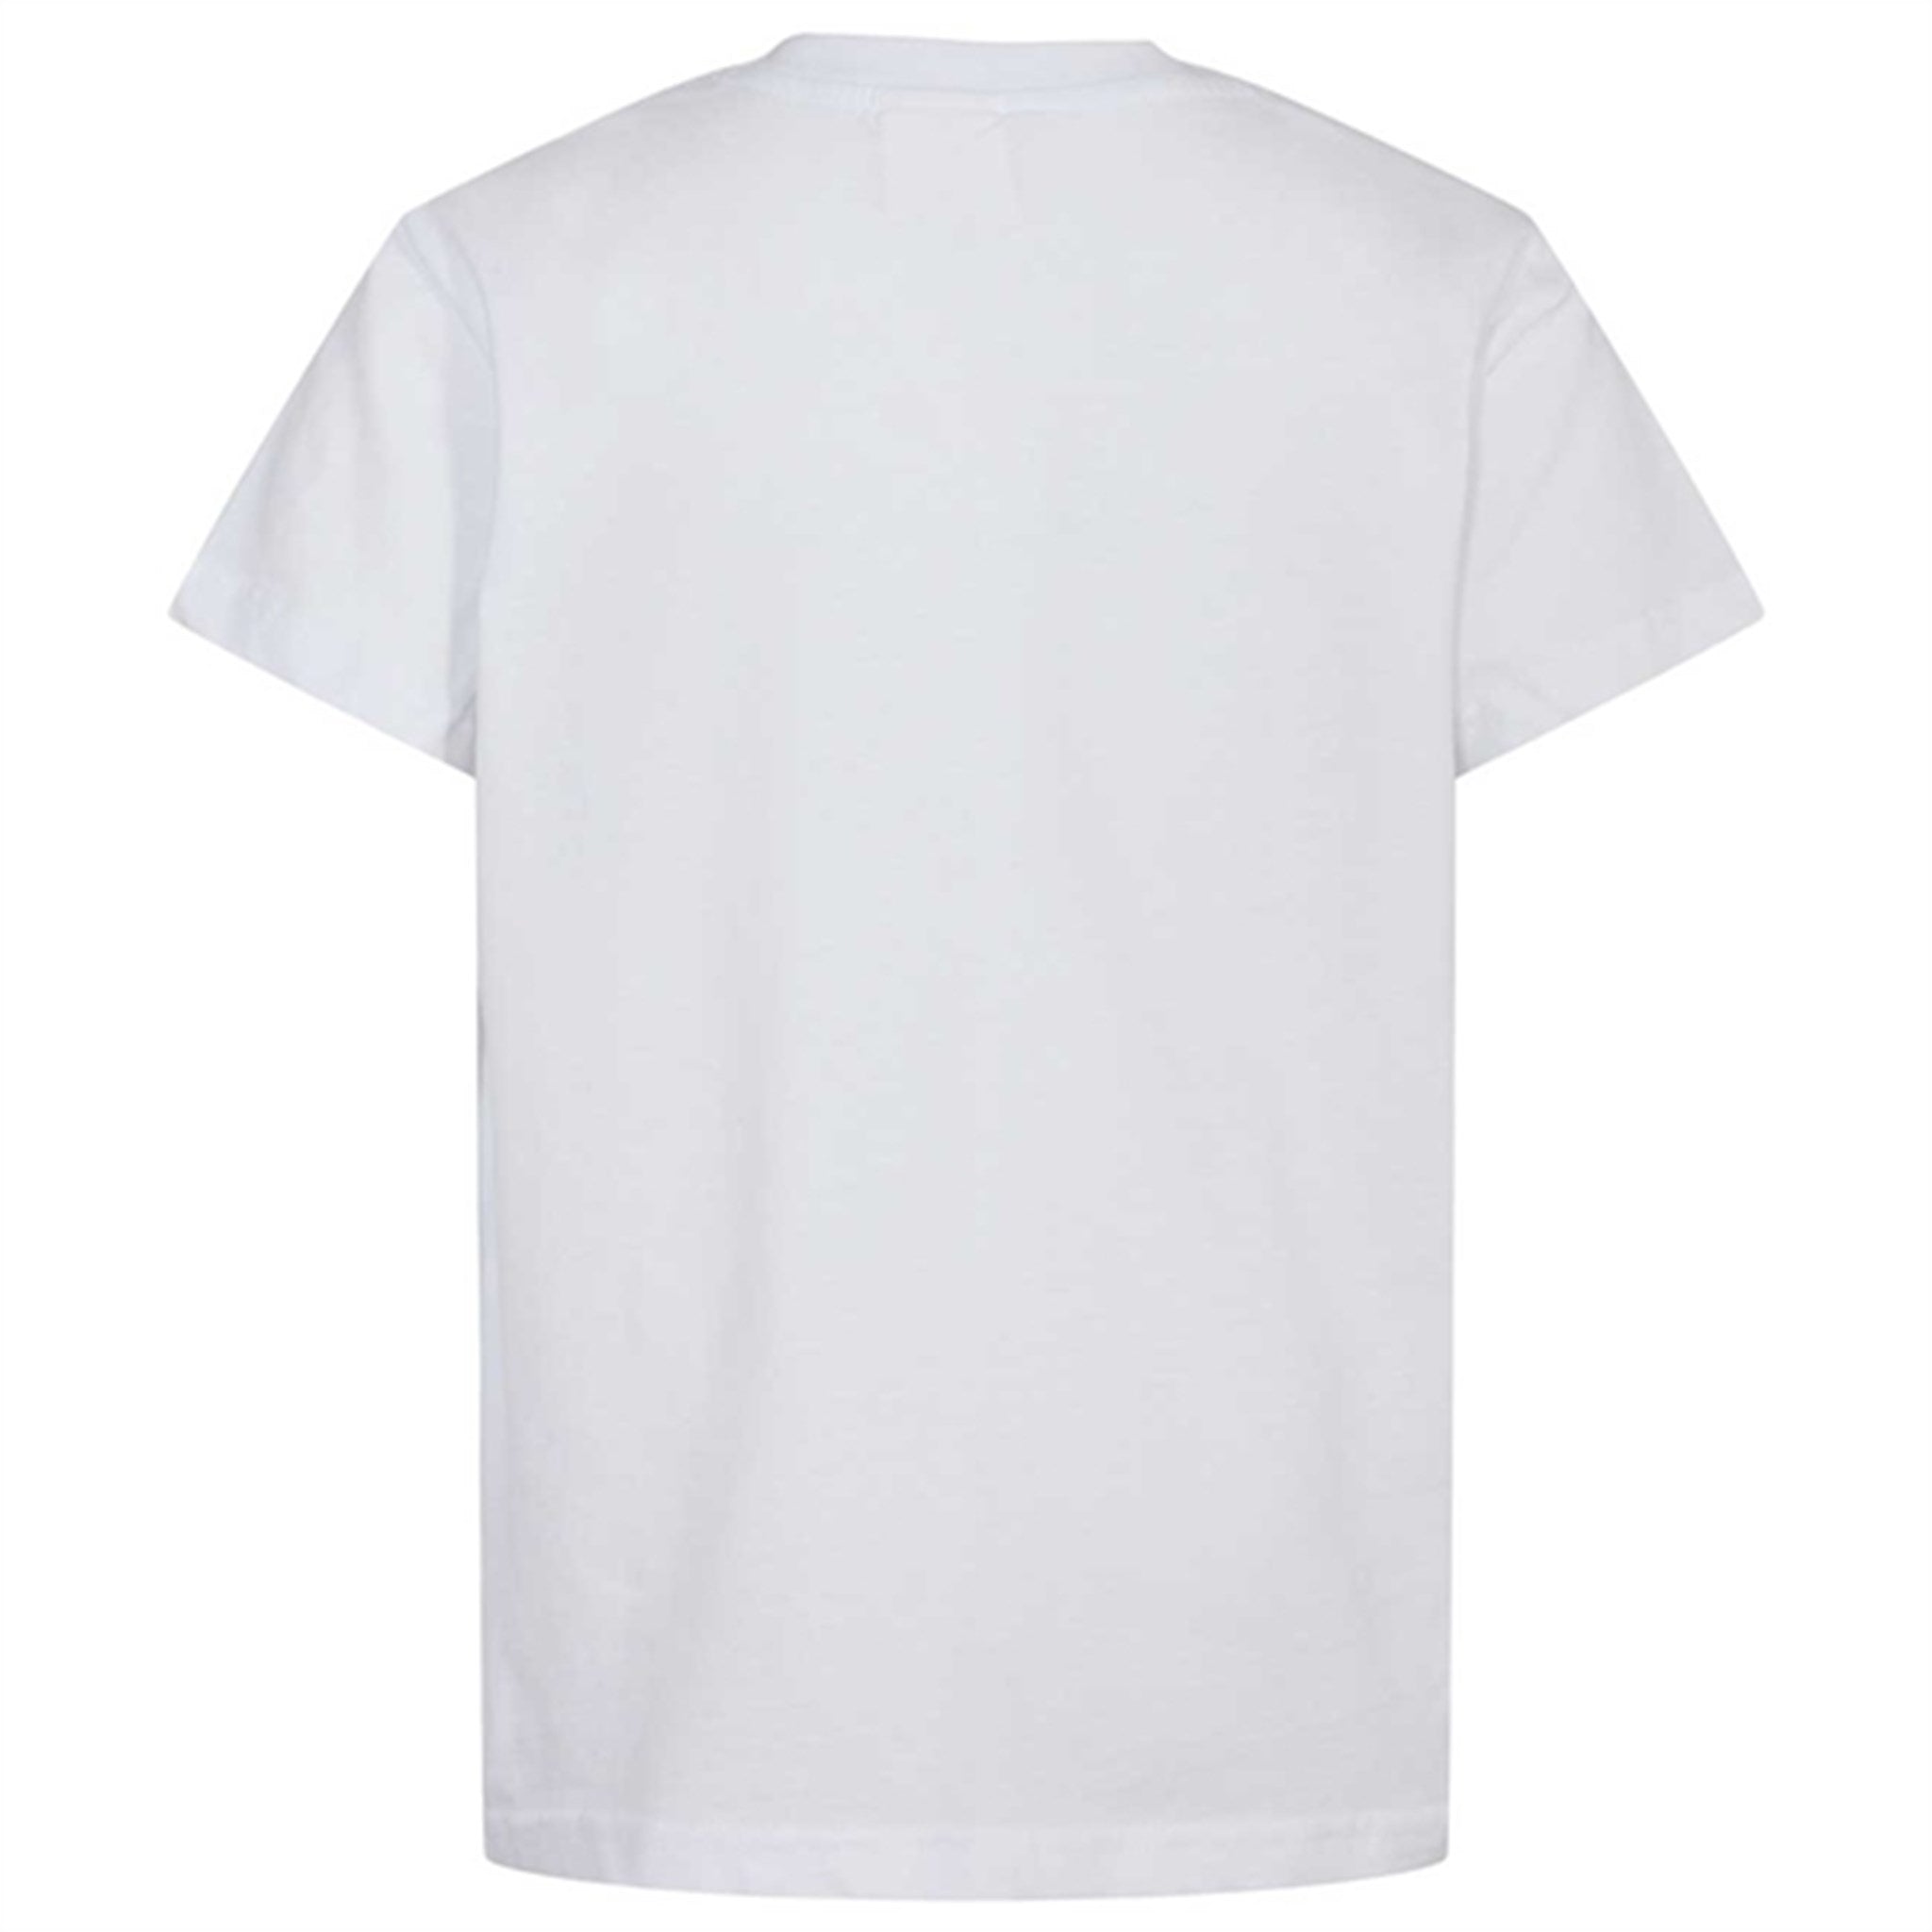 Sofie Schnoor Young White Noos T-shirt 2